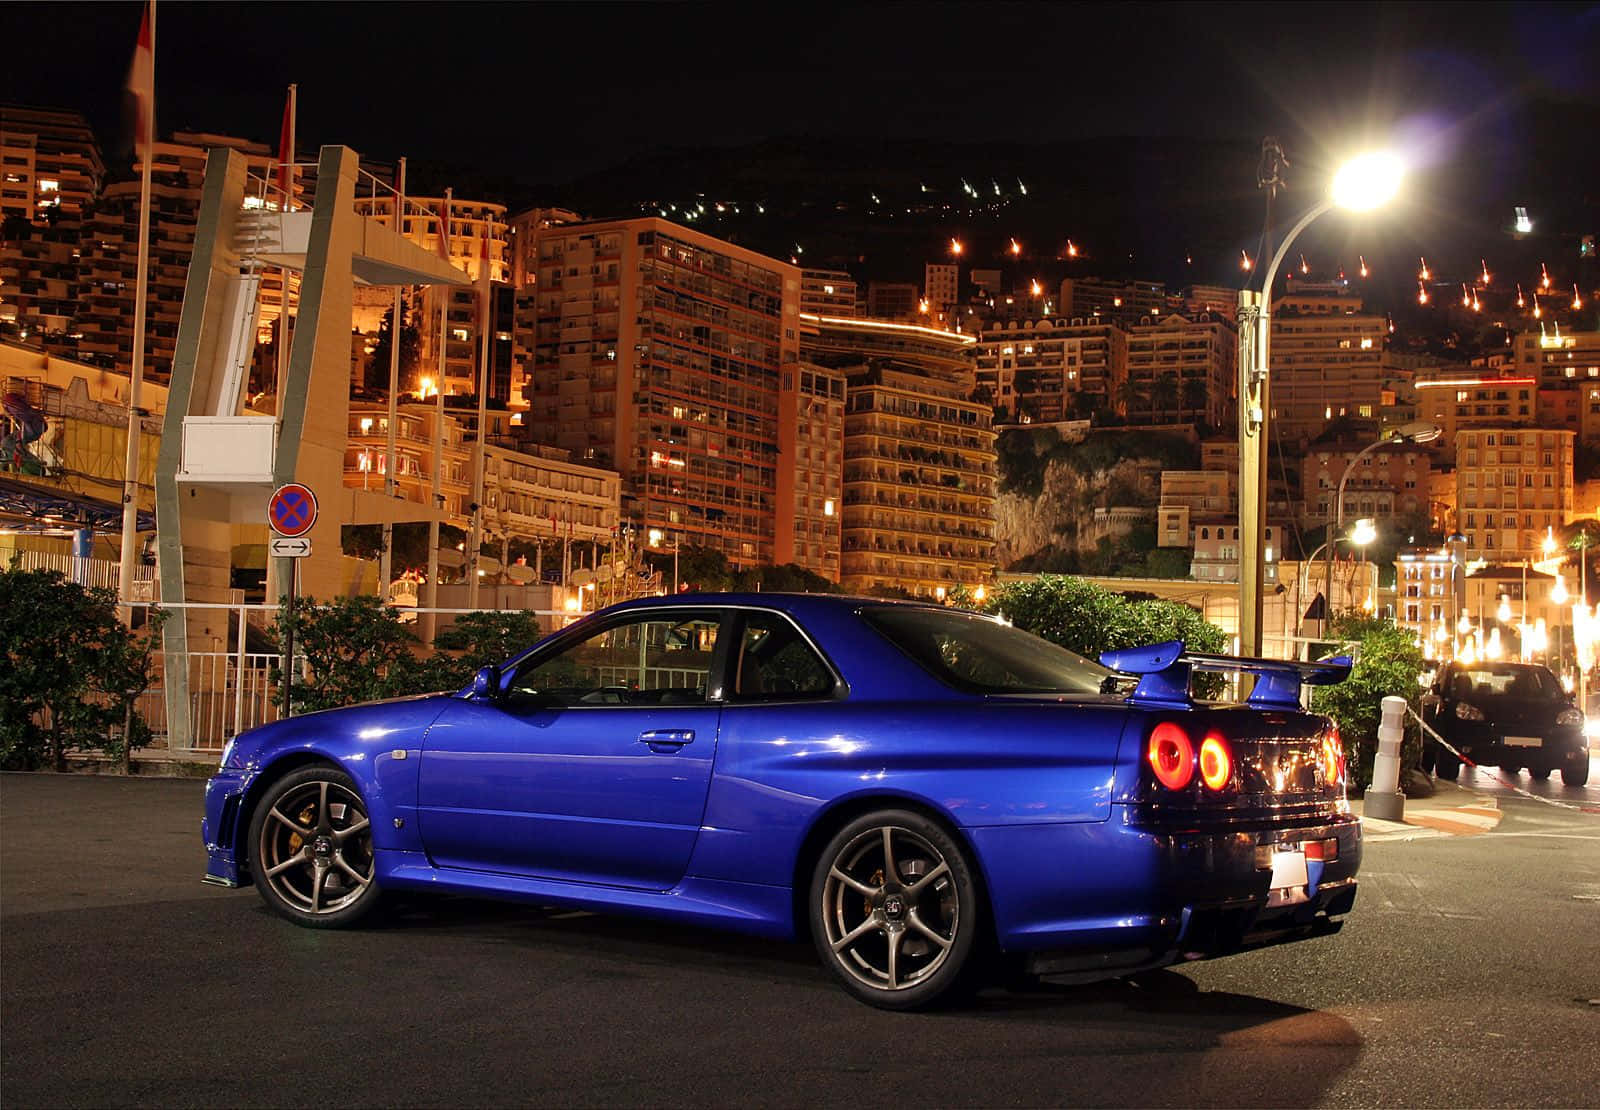 Zoom Off The Streets With The Cool Gtr! Wallpaper